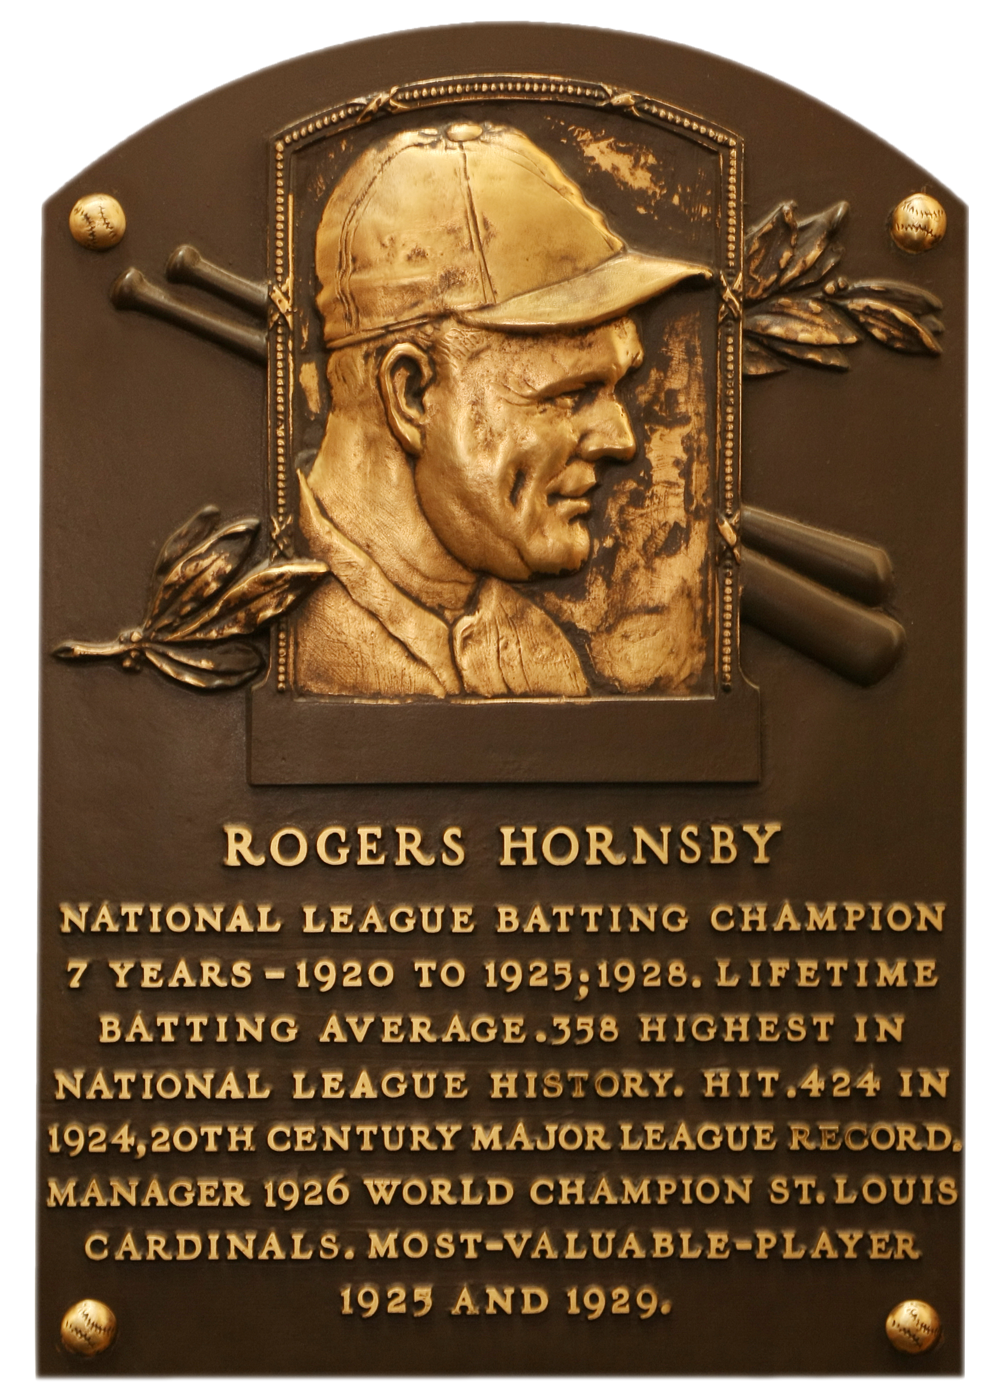 Rogers Hornsby Hall of Fame plaque